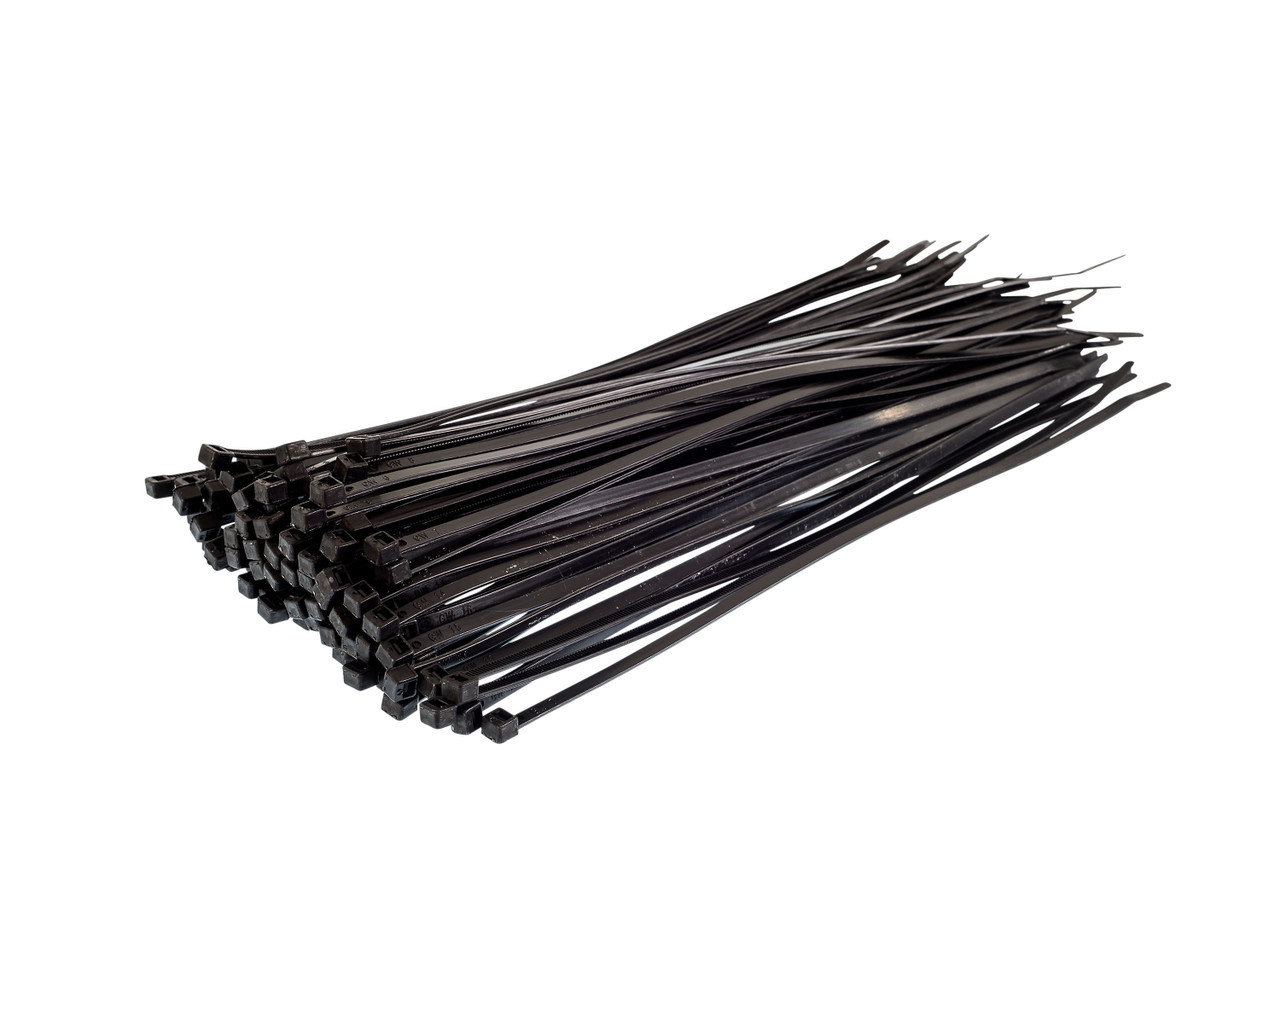 Cable Ties Releasable Black 300mm Pack of 100 - Leyland SDM